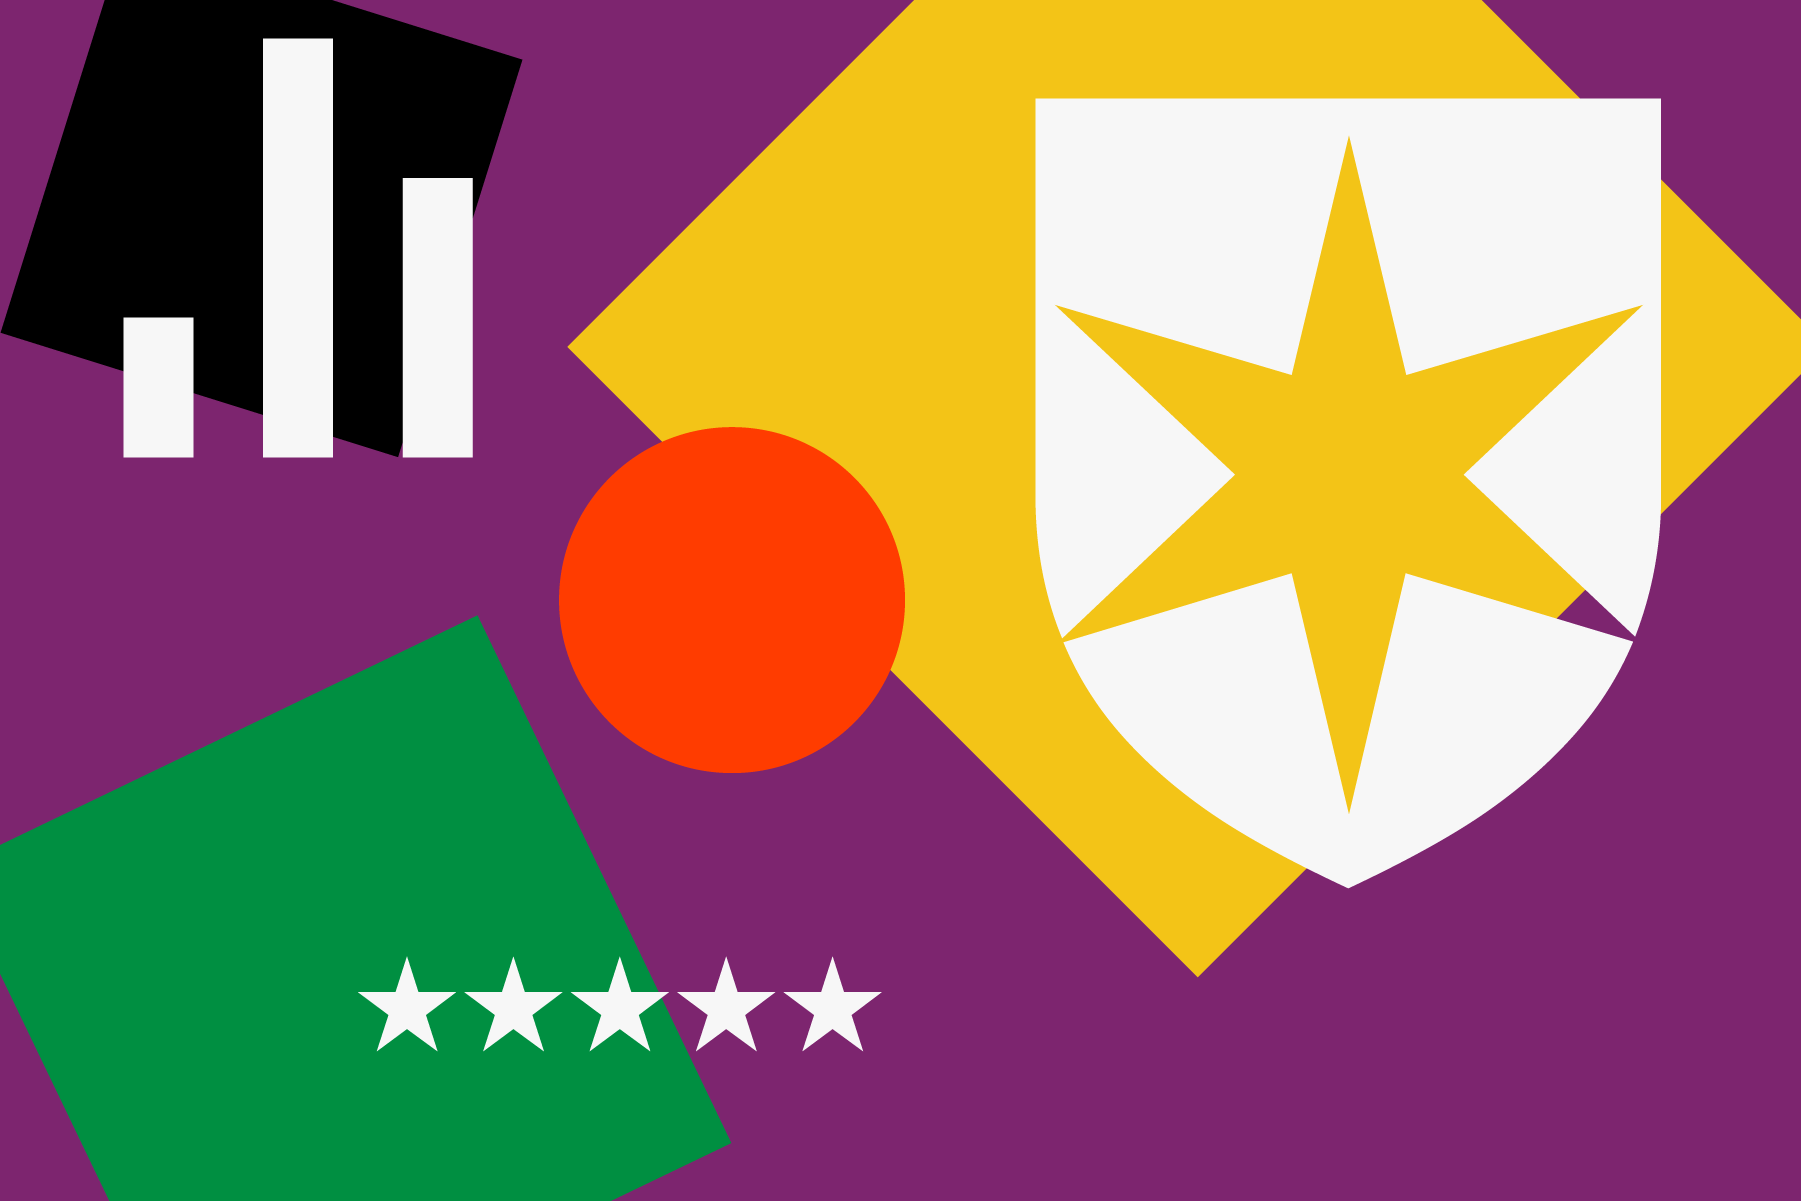 Illustration of white stars reminiscent of Morningstar's ratings system appearing over a purple background with multi-colored shapes